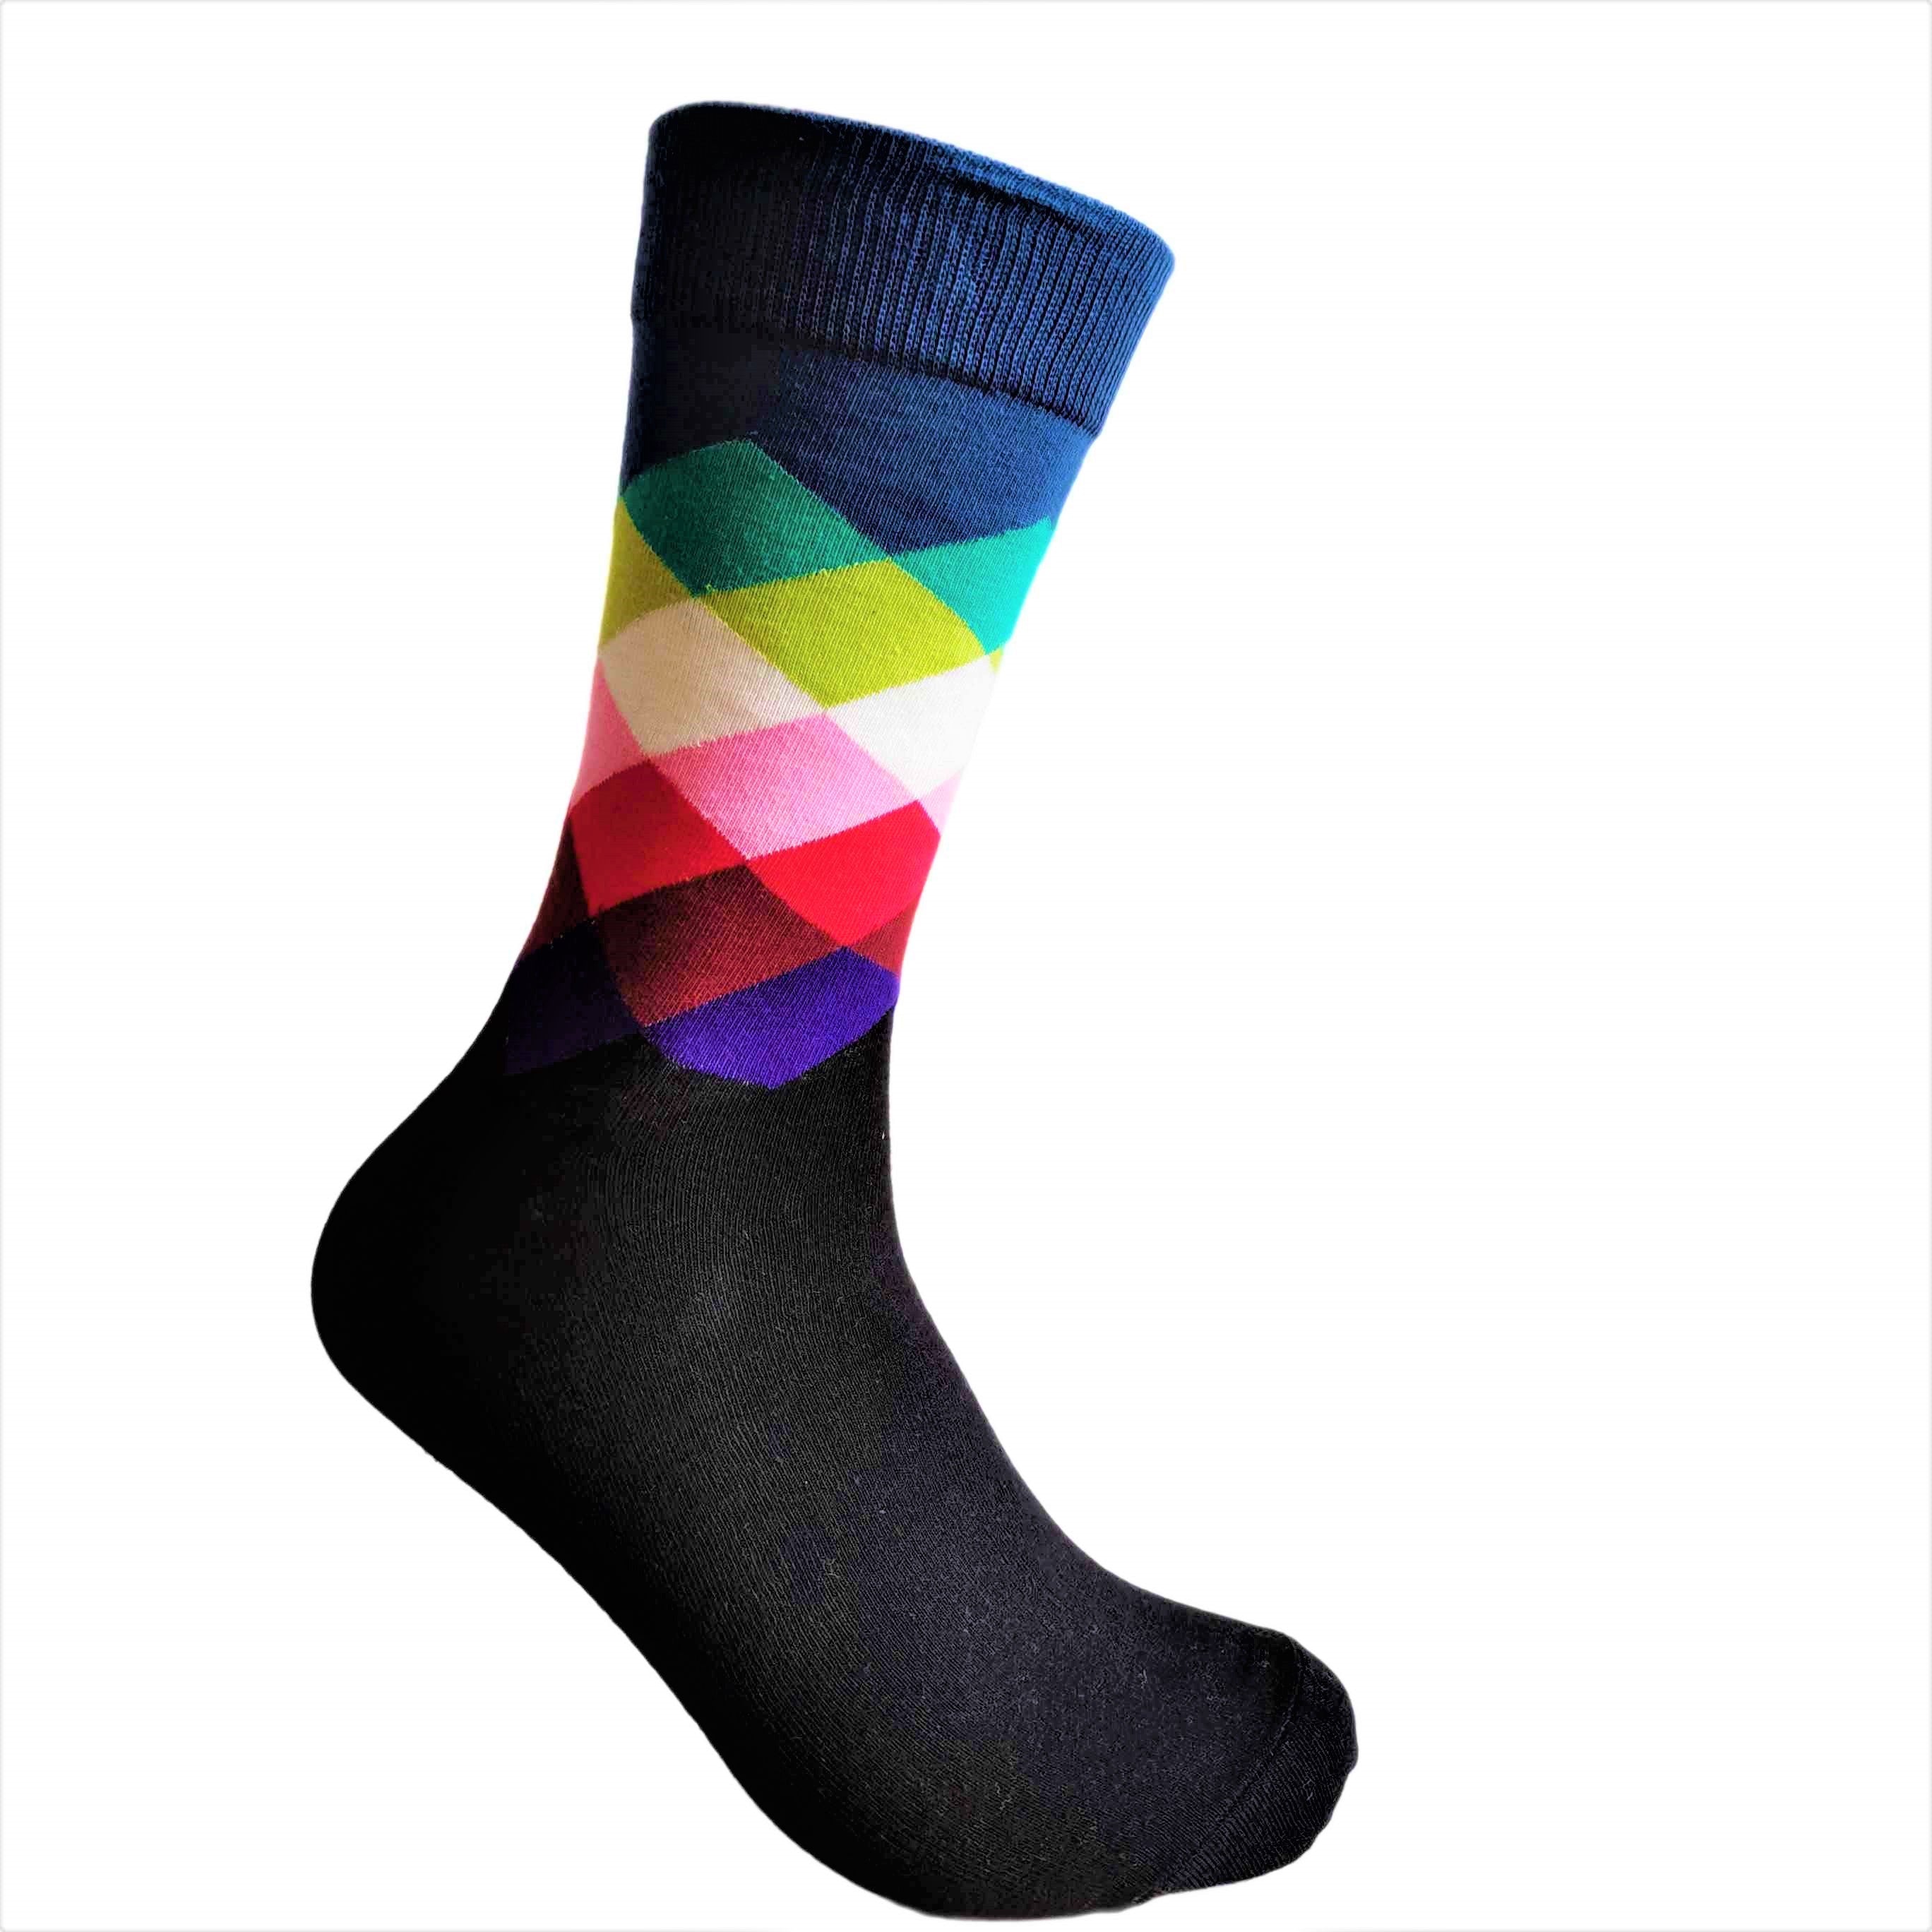 3-Pack Mixed Patterned Socks - British D'sire